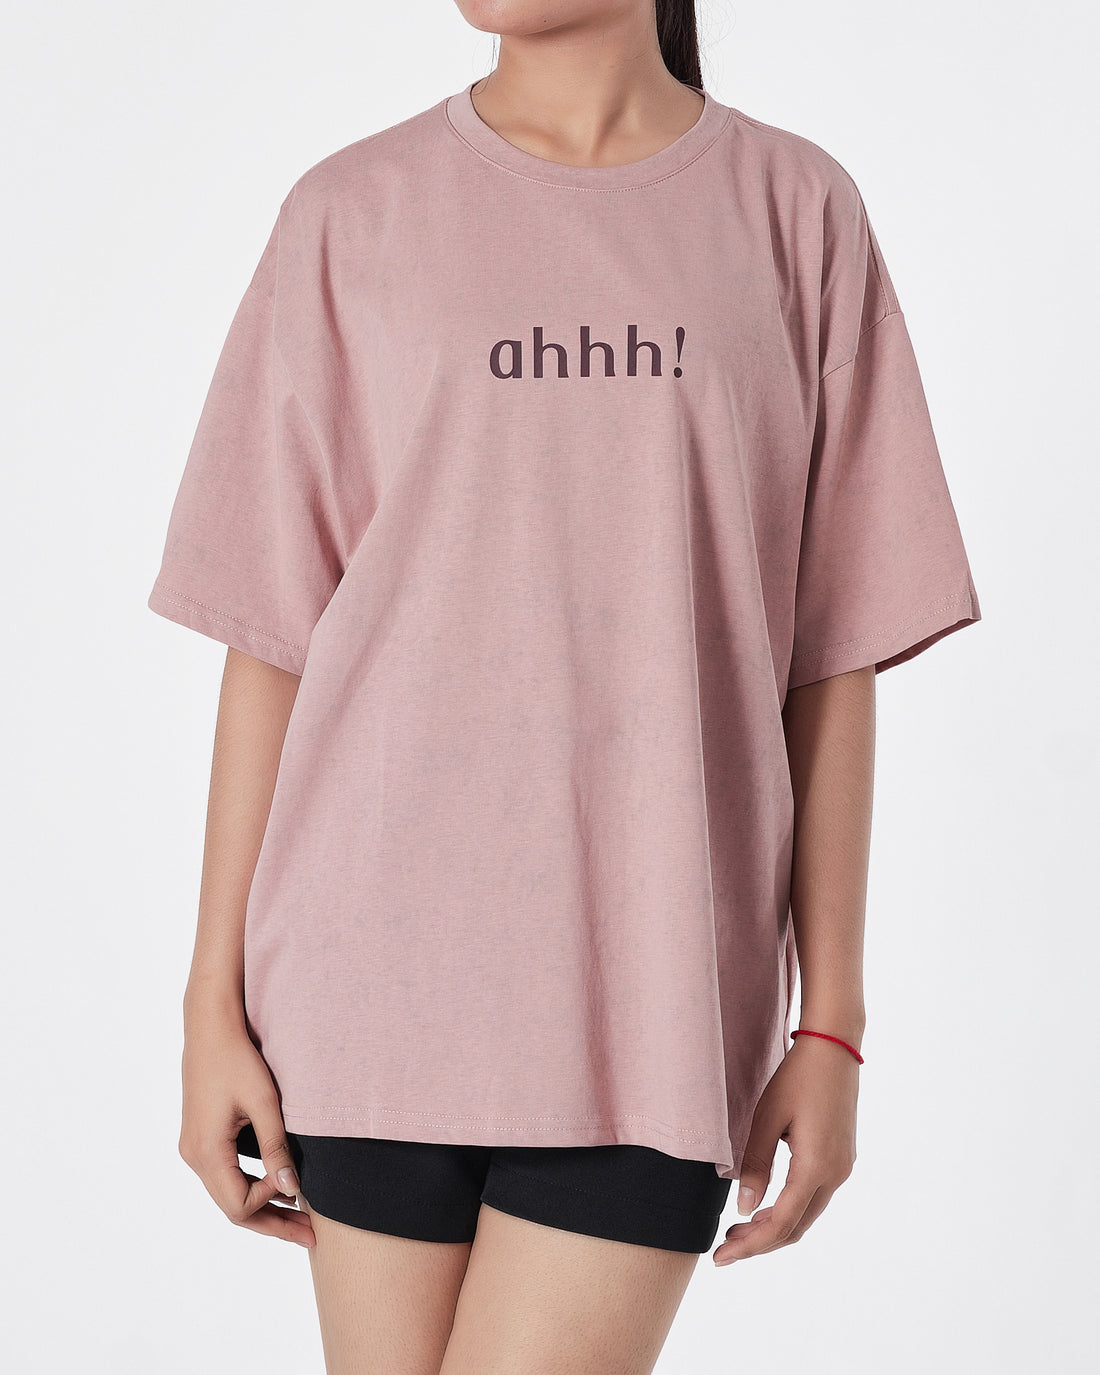 Unisex Over Size Pink T-Shirt 13.90